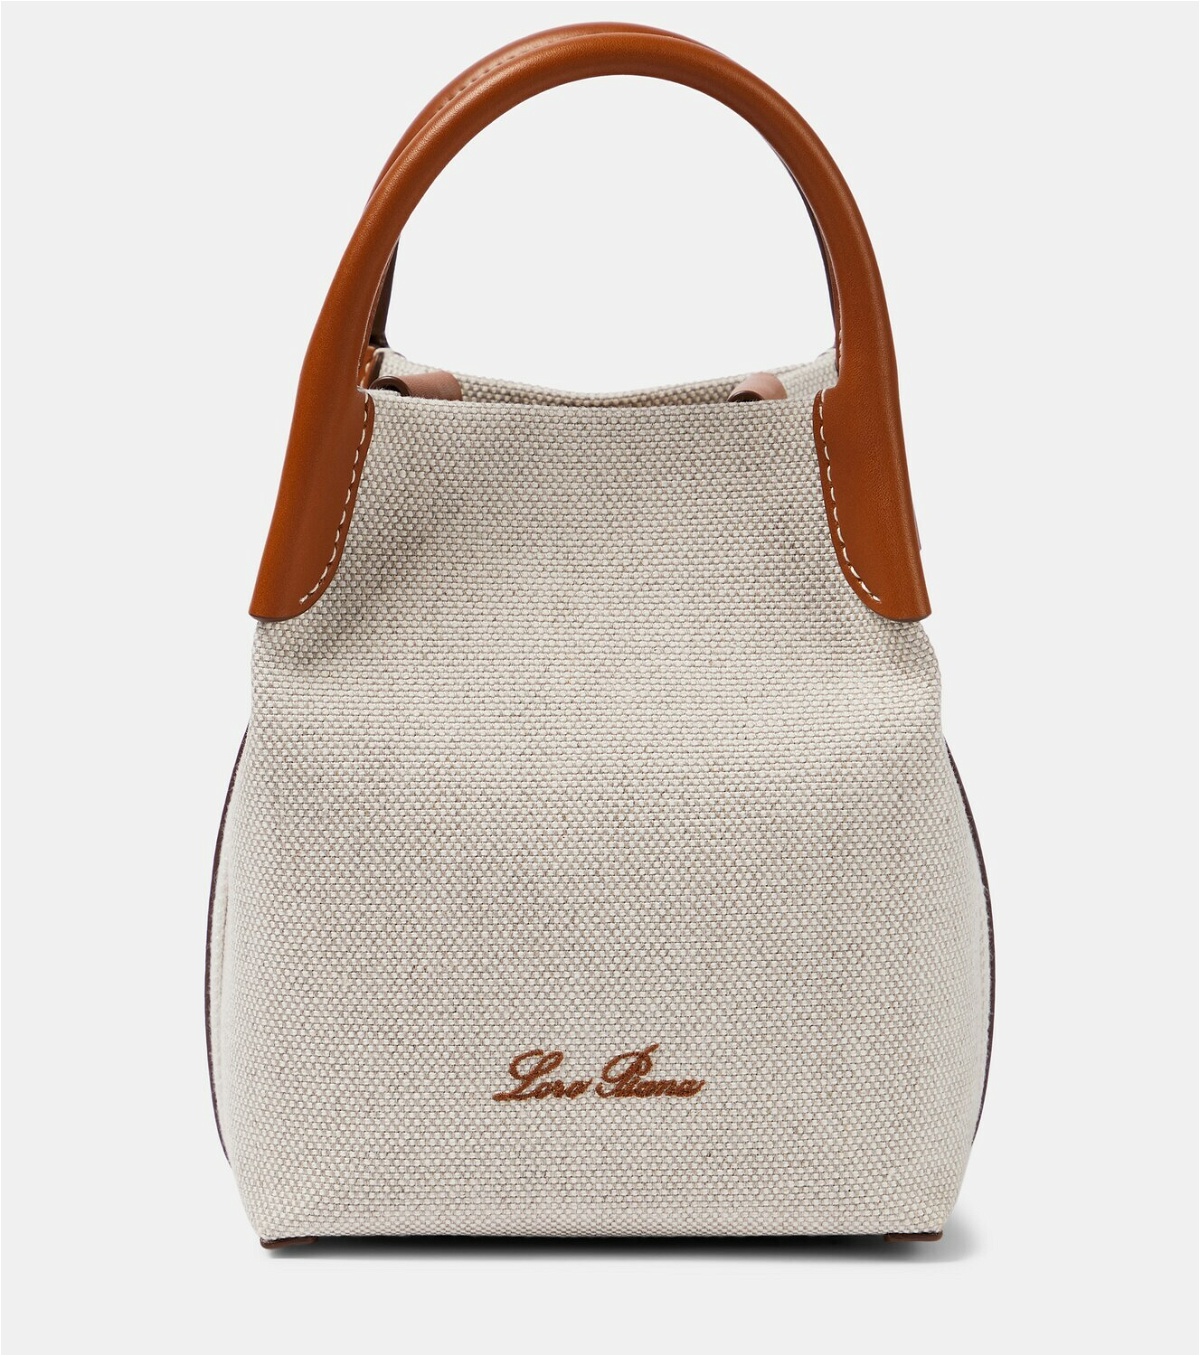 the loro piana bale bag is the one you need